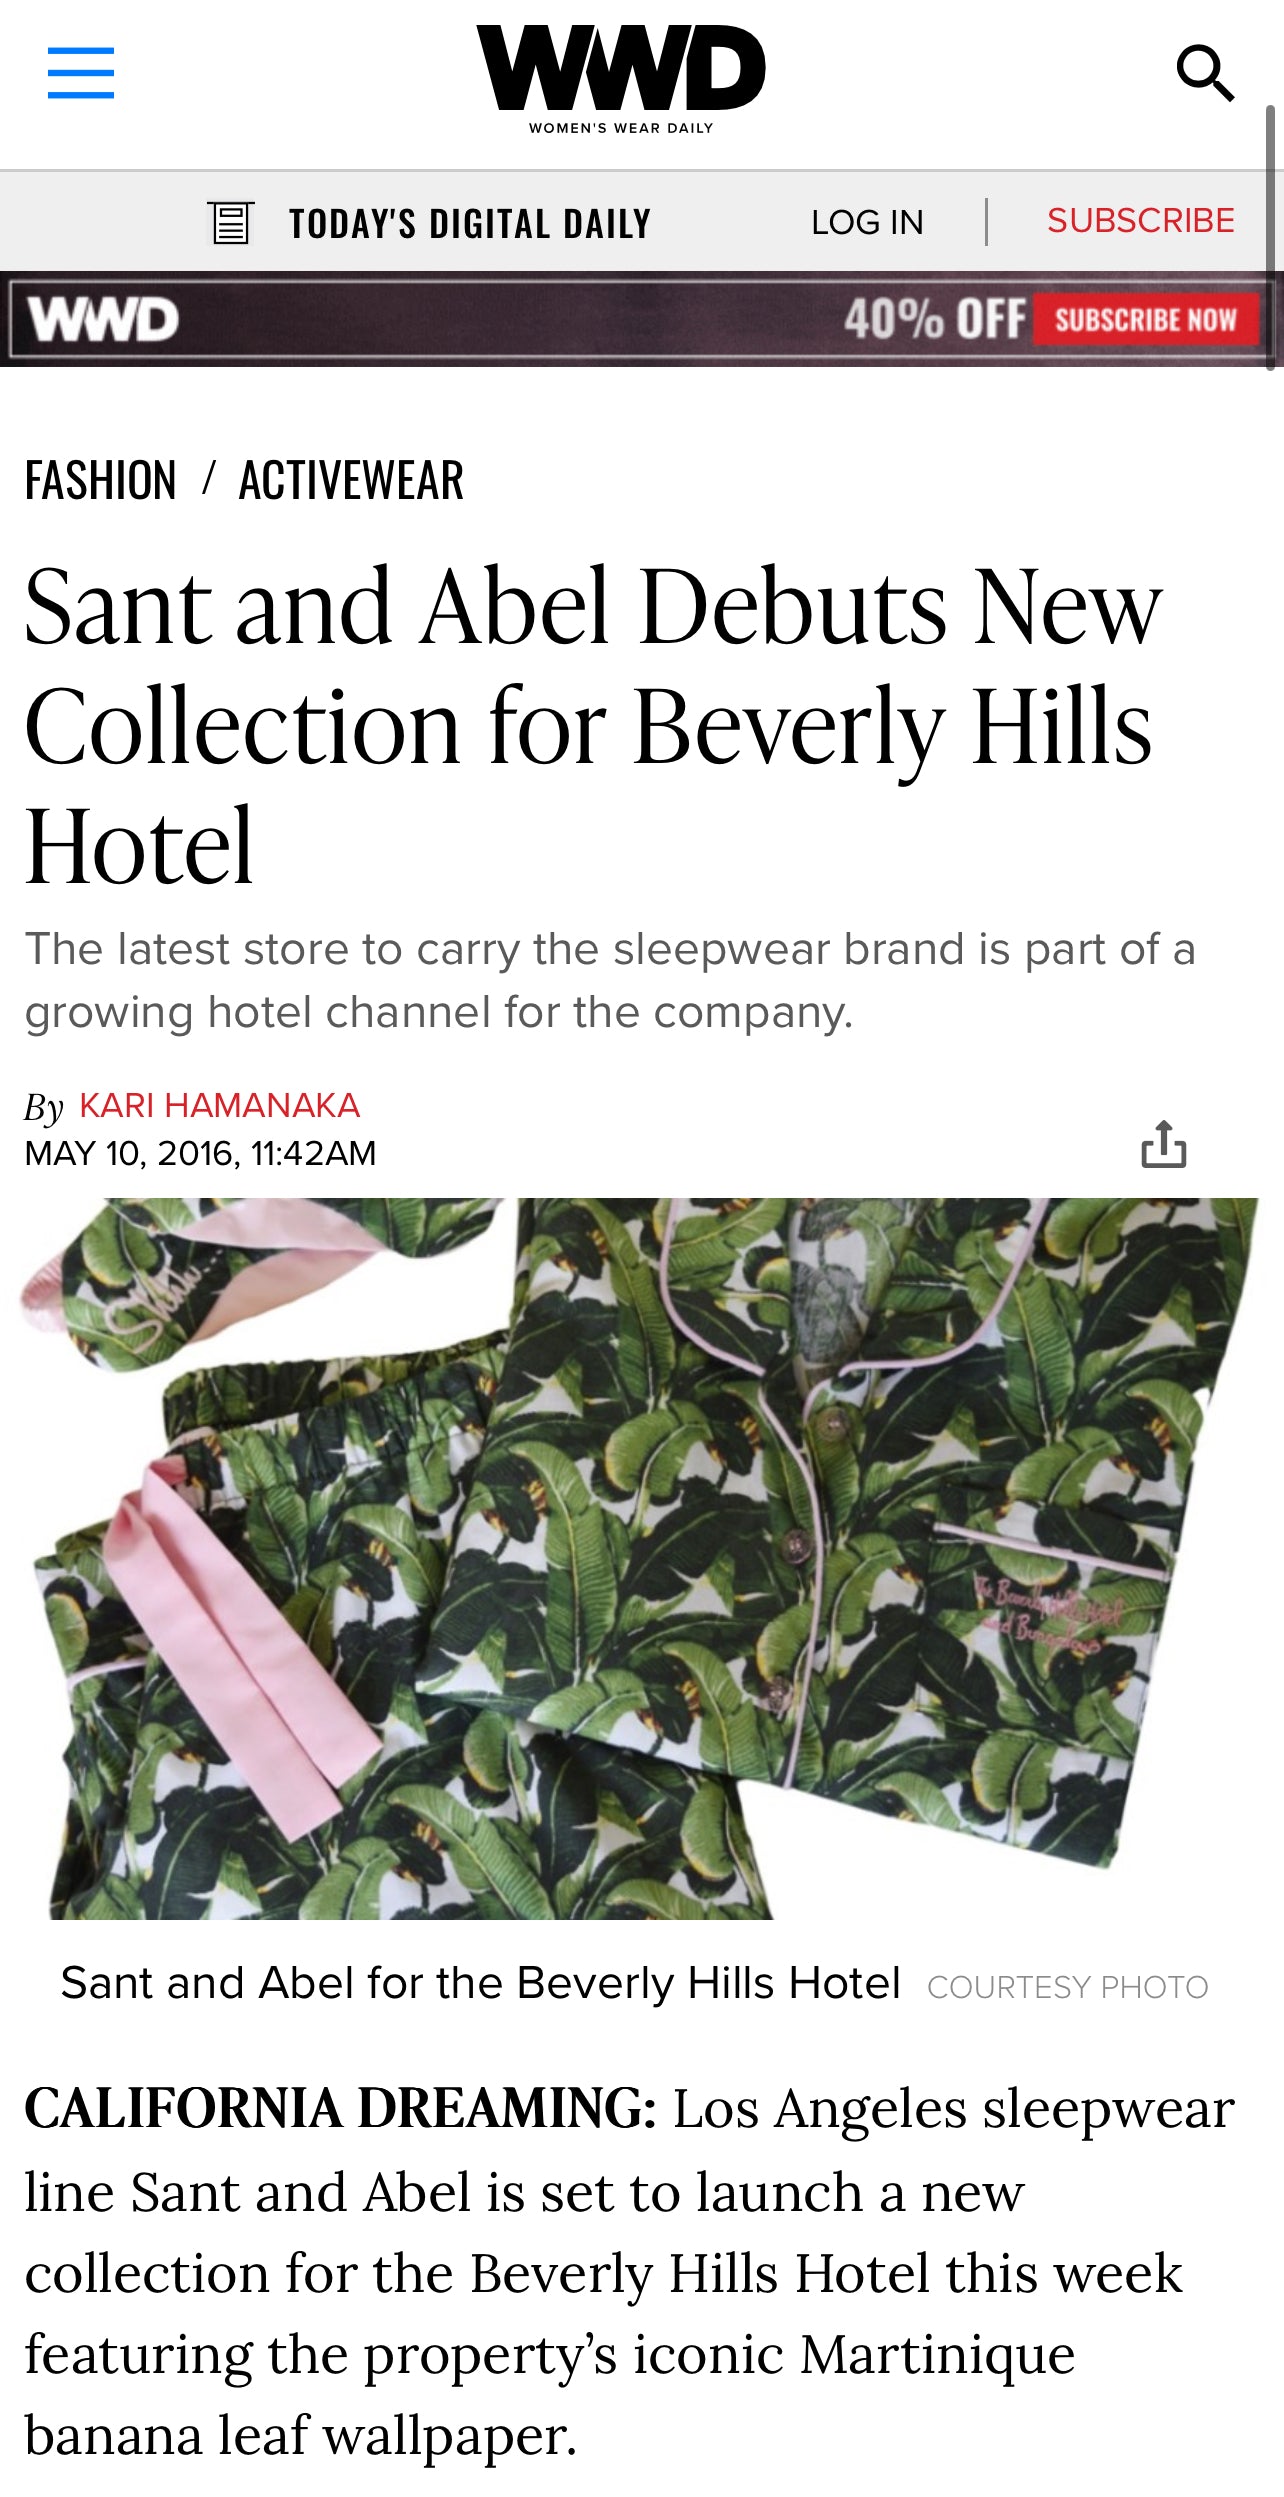 Women's Wear Daily New Collection for Beverly Hills Hotel